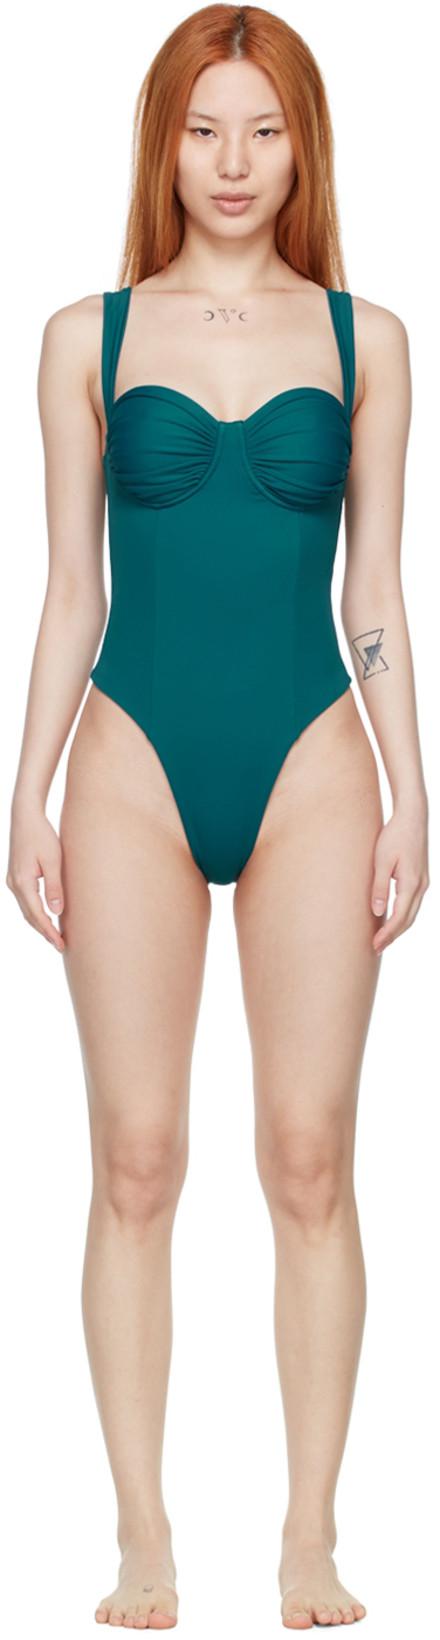 SSENSE Exclusive Blue Vision One-Piece Swimsuit by BELLE THE LABEL